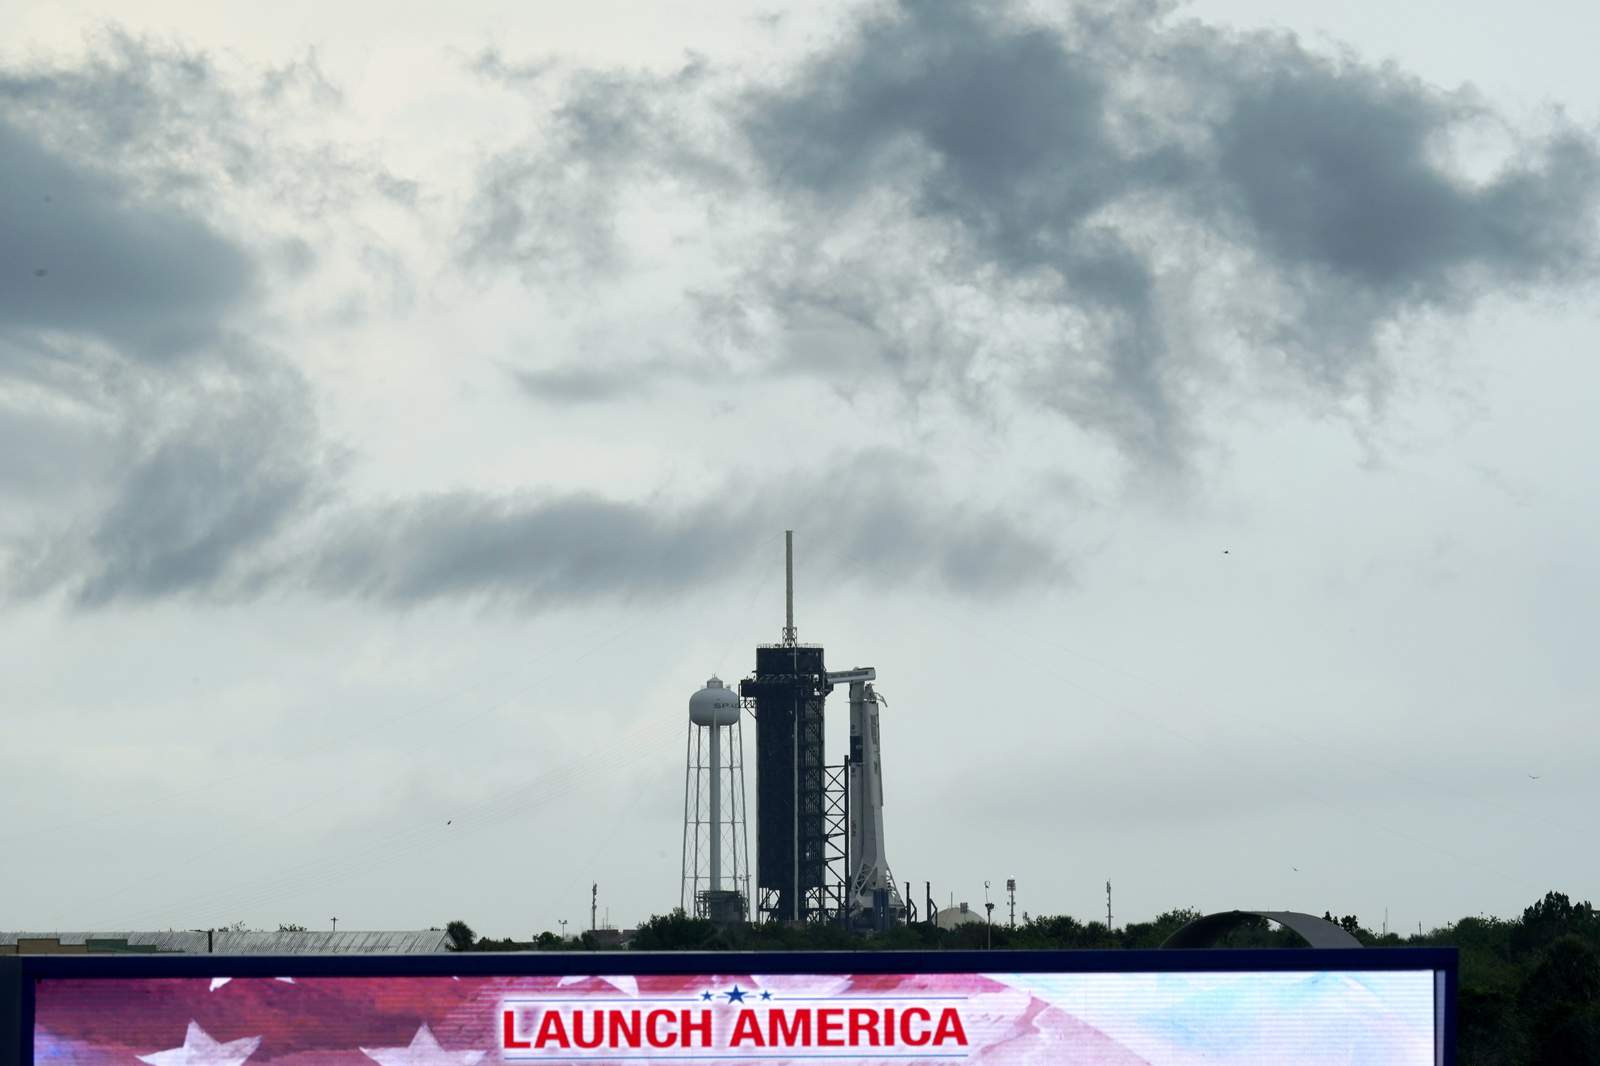 Weather forecasting for a rocket launch: Its much more difficult than you might think